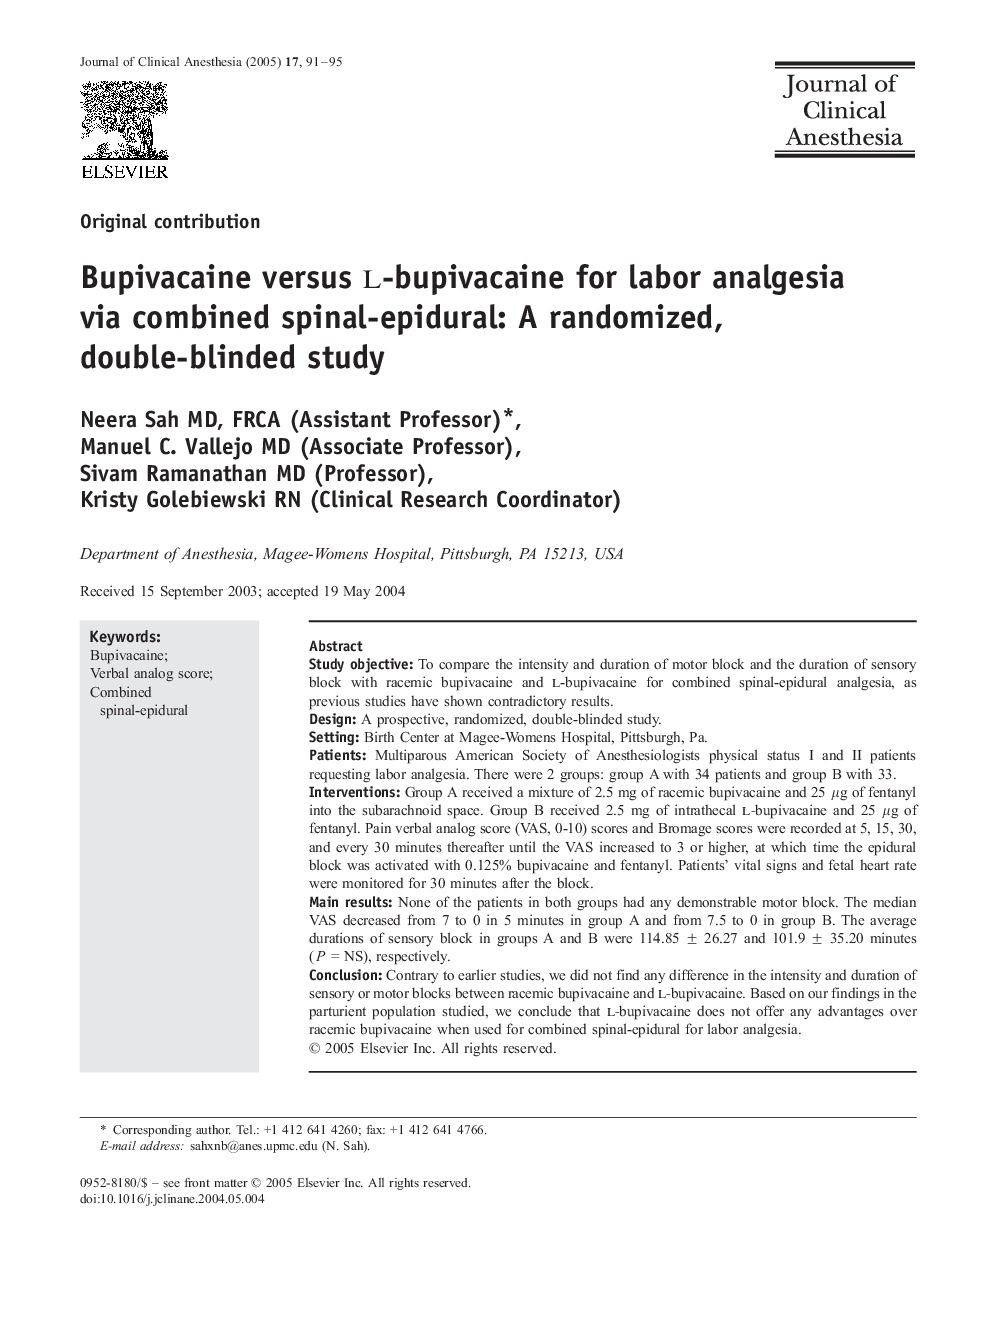 Bupivacaine versus l-bupivacaine for labor analgesia via combined spinal-epidural: A randomized, double-blinded study